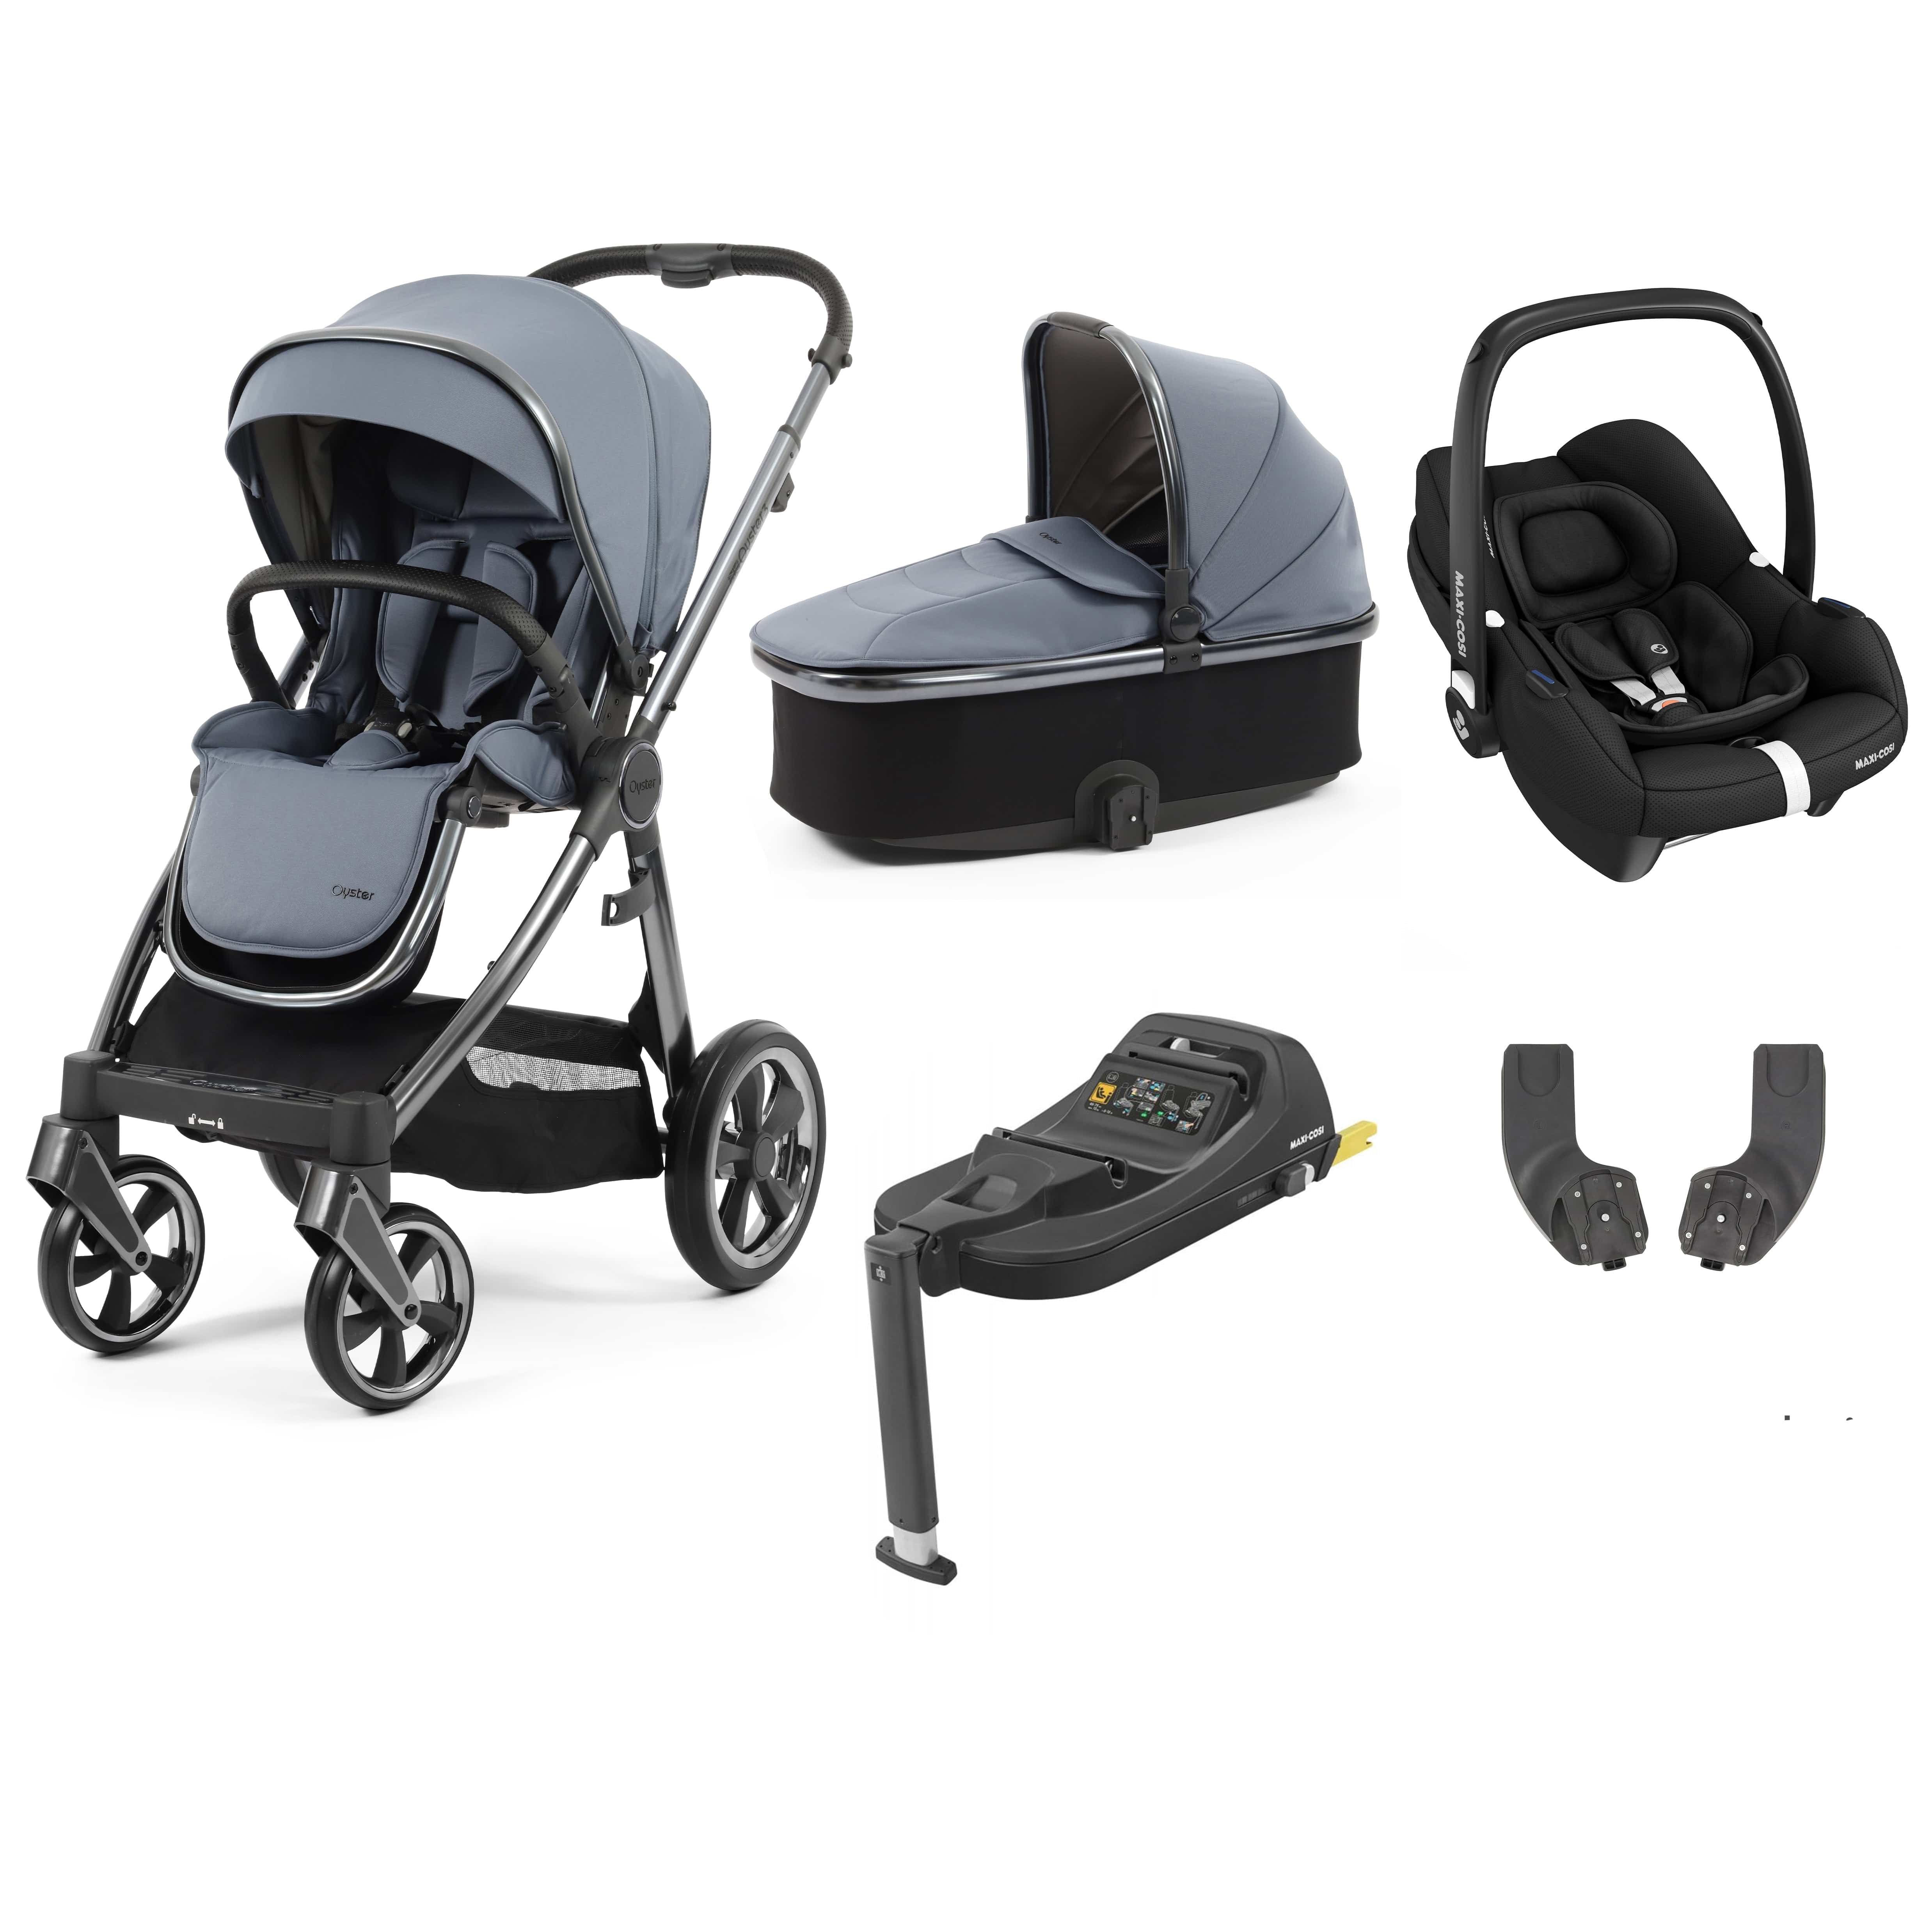 BabyStyle travel systems Babystyle Oyster 3 Essential Bundle with Car Seat - Dream Blue 14763-DMB